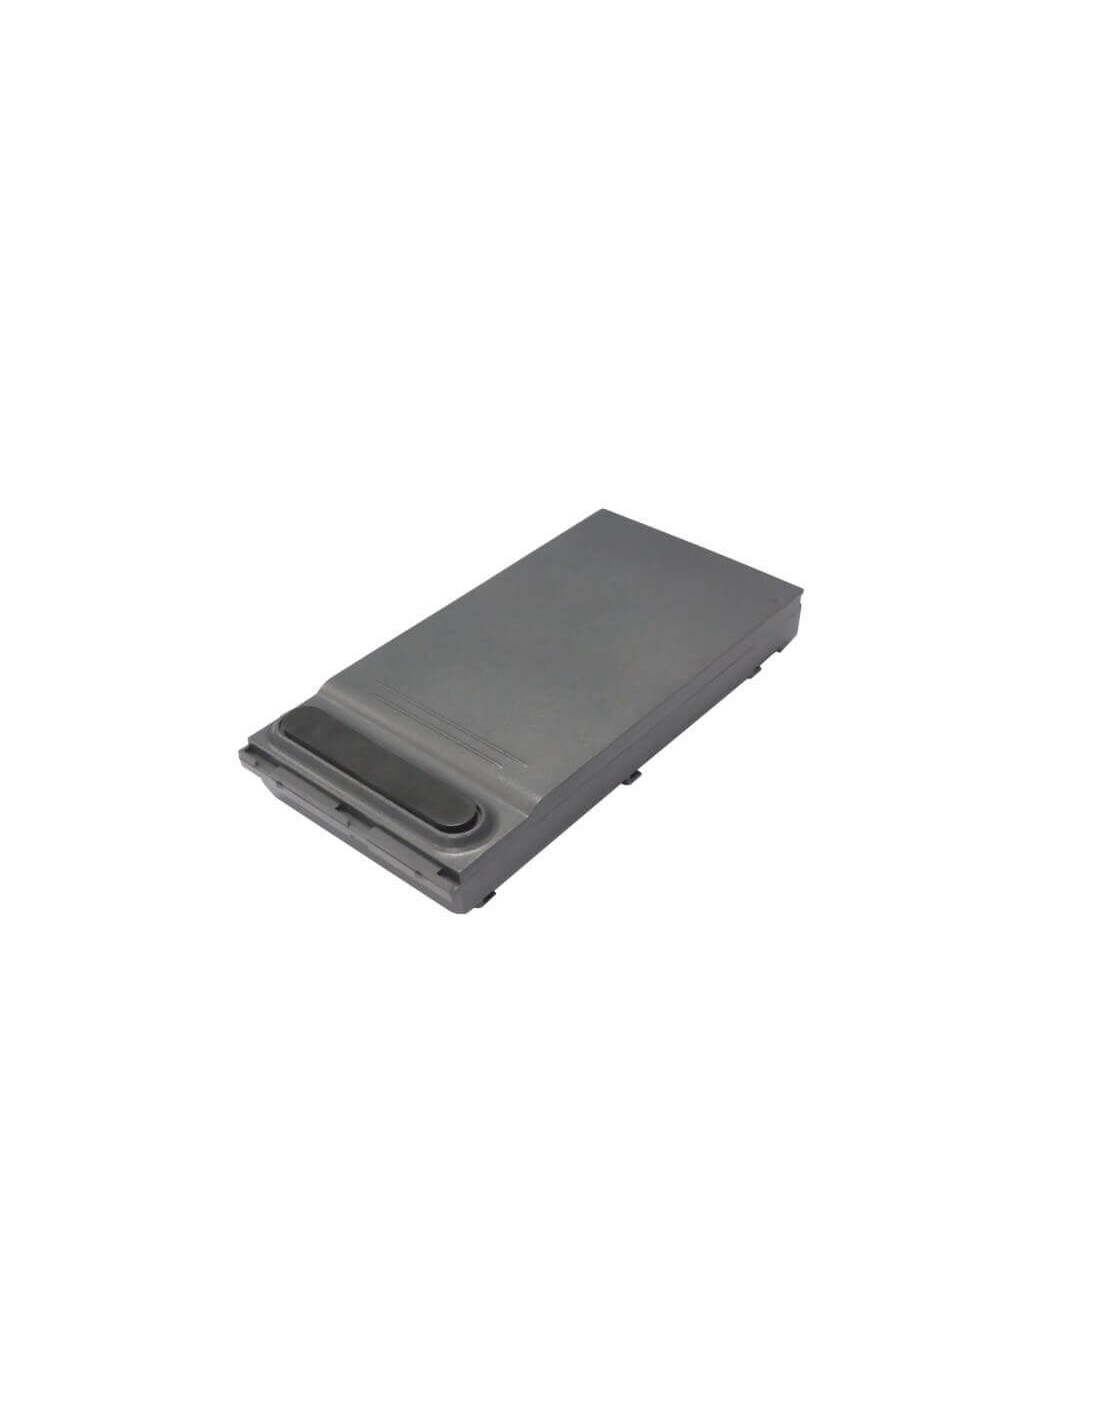 Grey Battery for Acer Travelmate 620, Travelmate 630, Travelmate 632 14.8V, 4400mAh - 65.12Wh